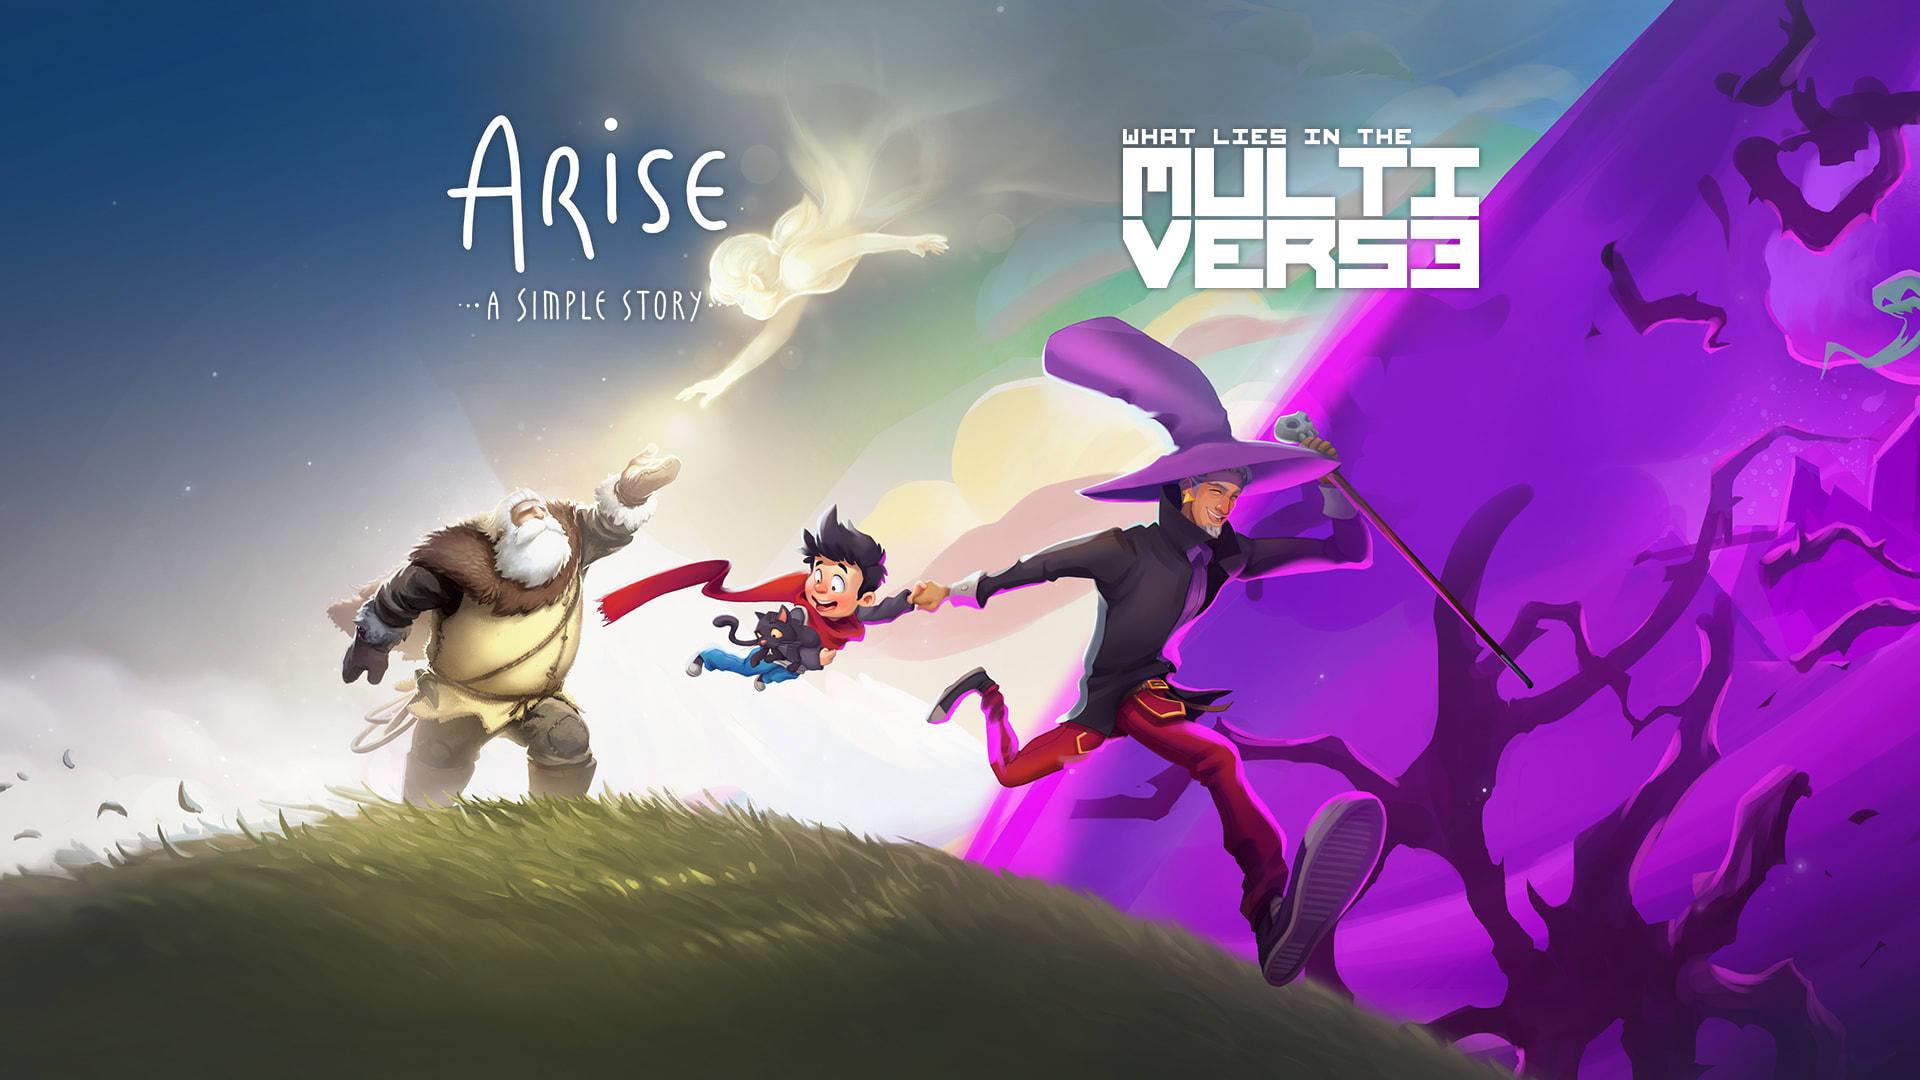 Arise + What Lies in the Multiverse Bundle 1